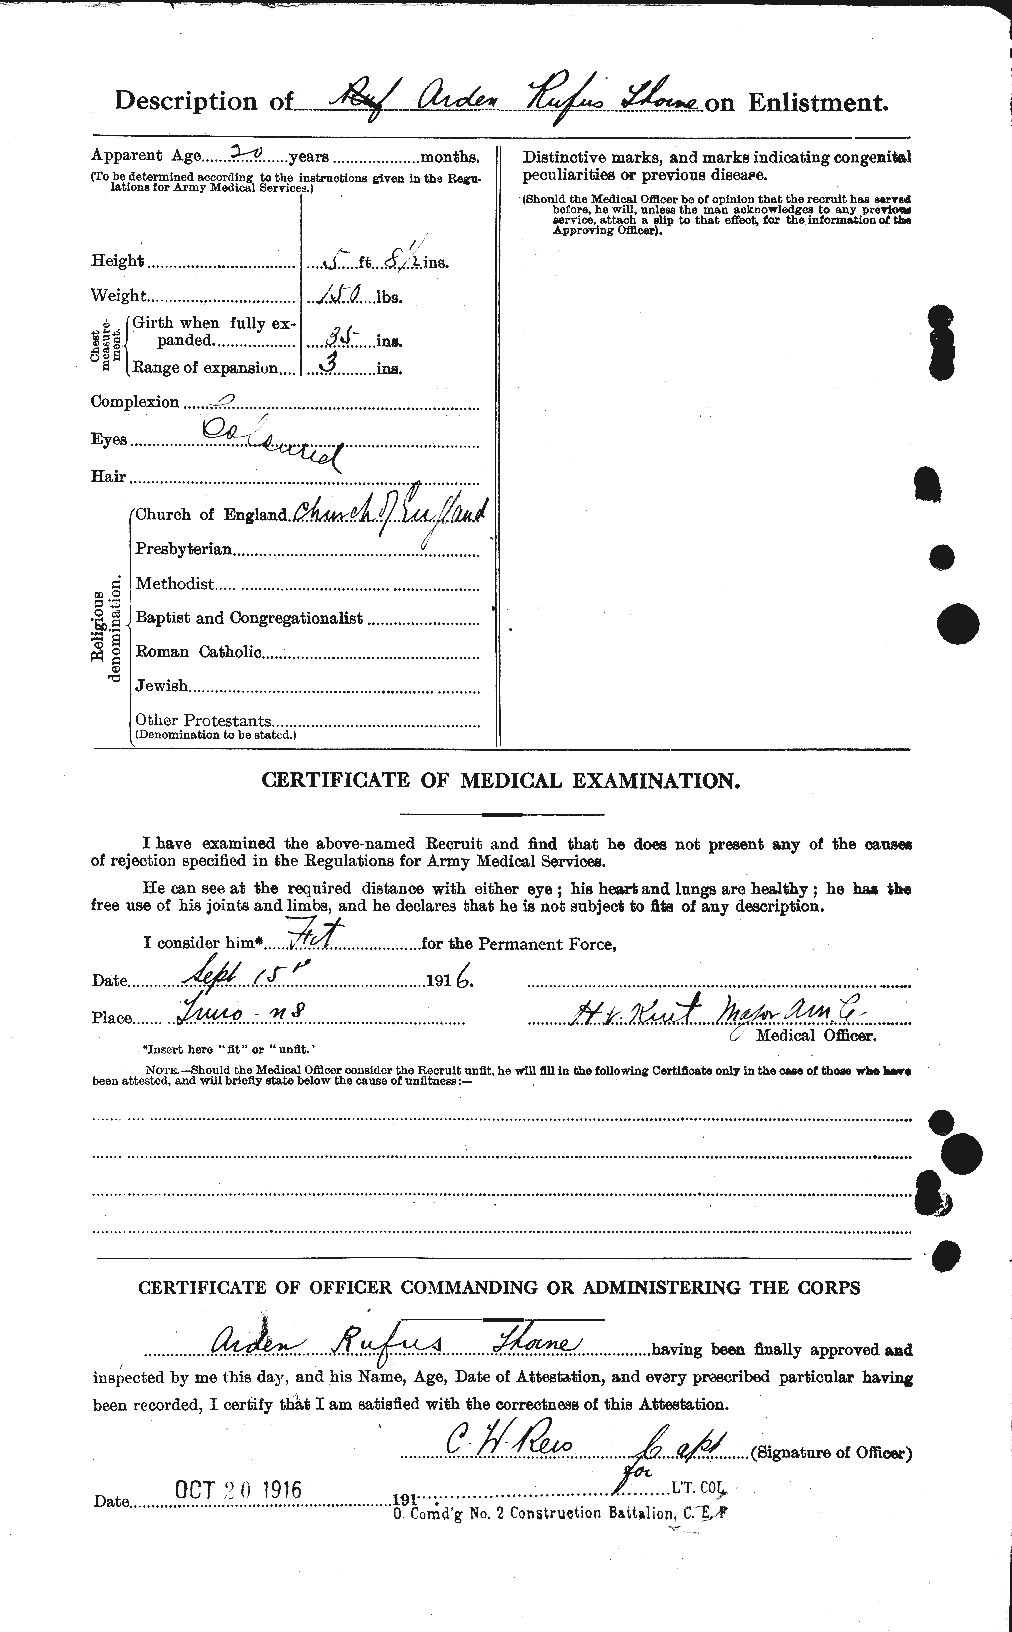 Personnel Records of the First World War - CEF 635869b